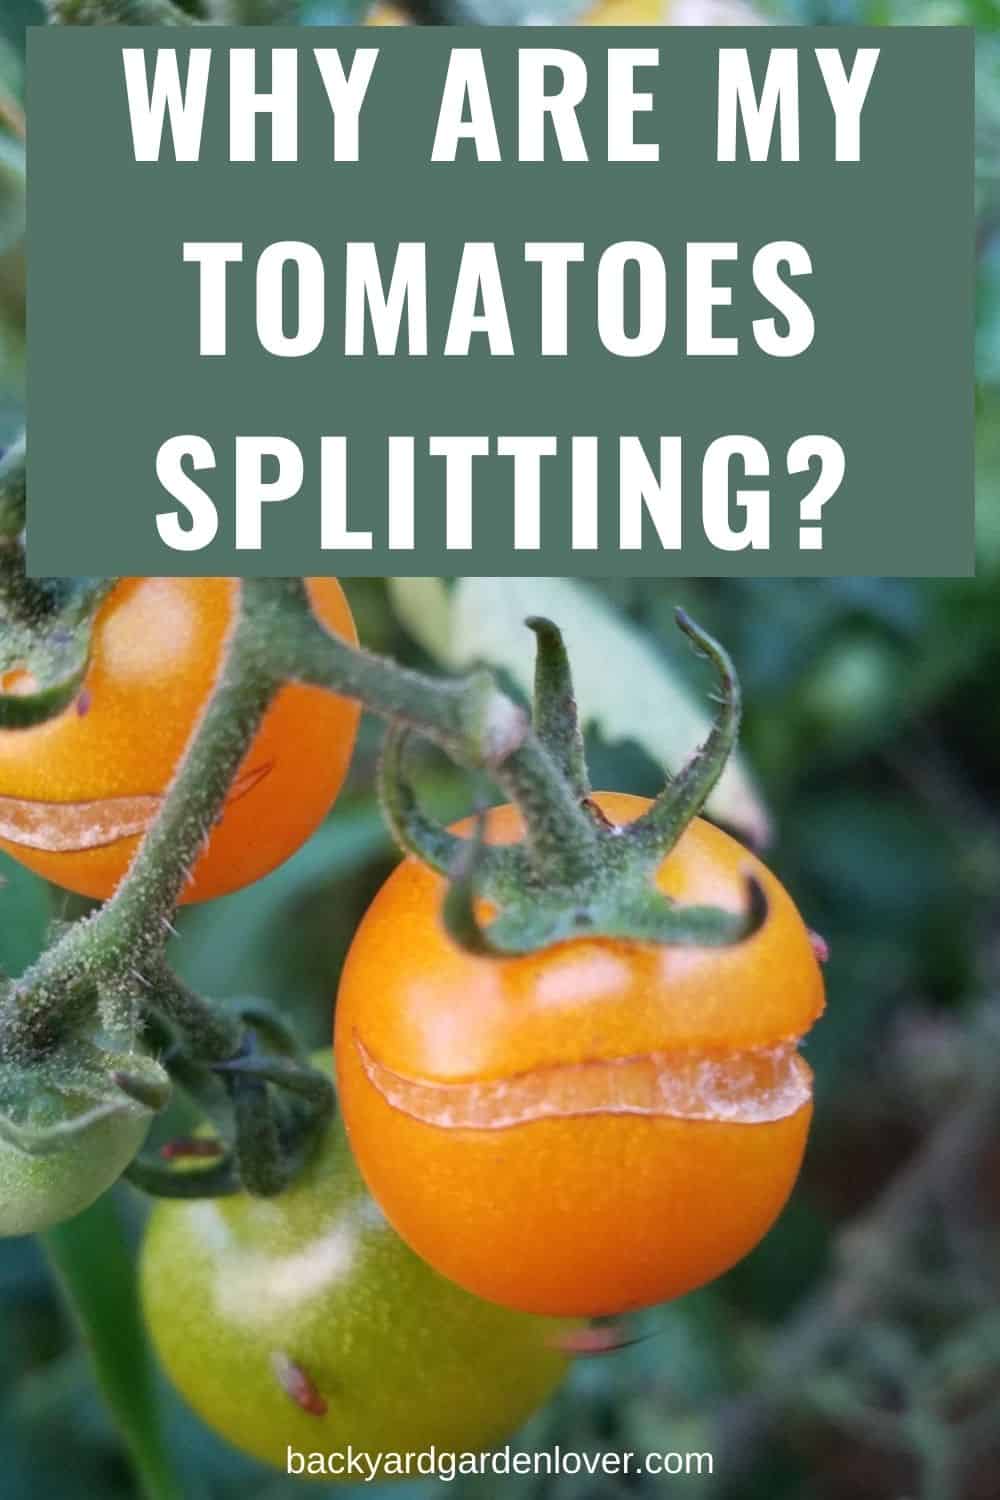 Why are my tomatoes splitting? - Pinterest image